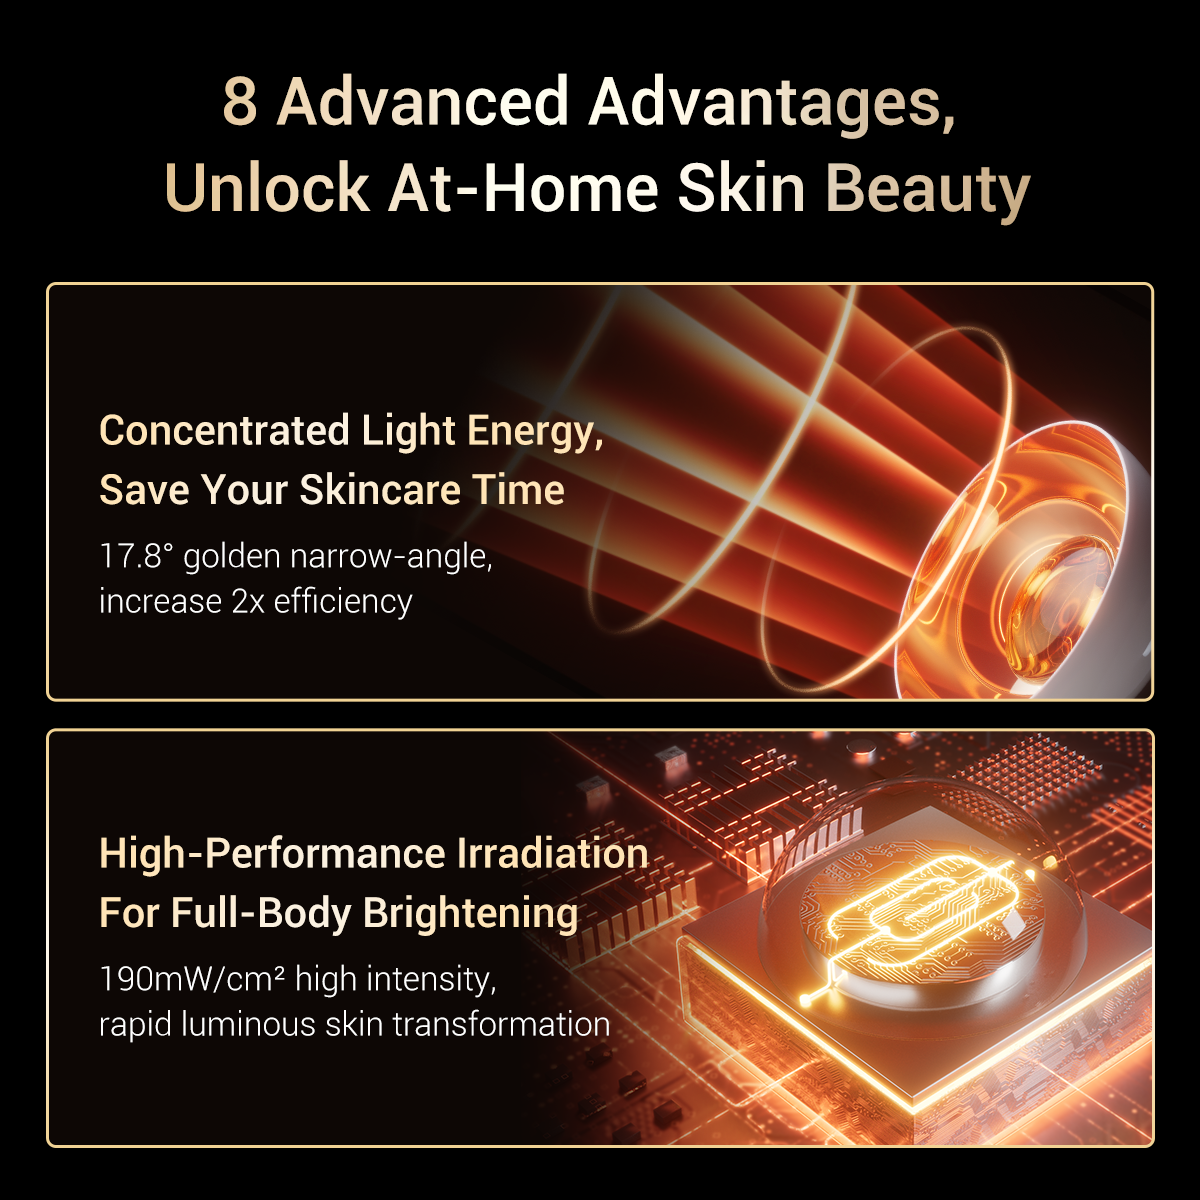 Advanced JOVS LED light device for DPL light therapy at home, offering concentrated light for skincare efficiency and full-body brightening.